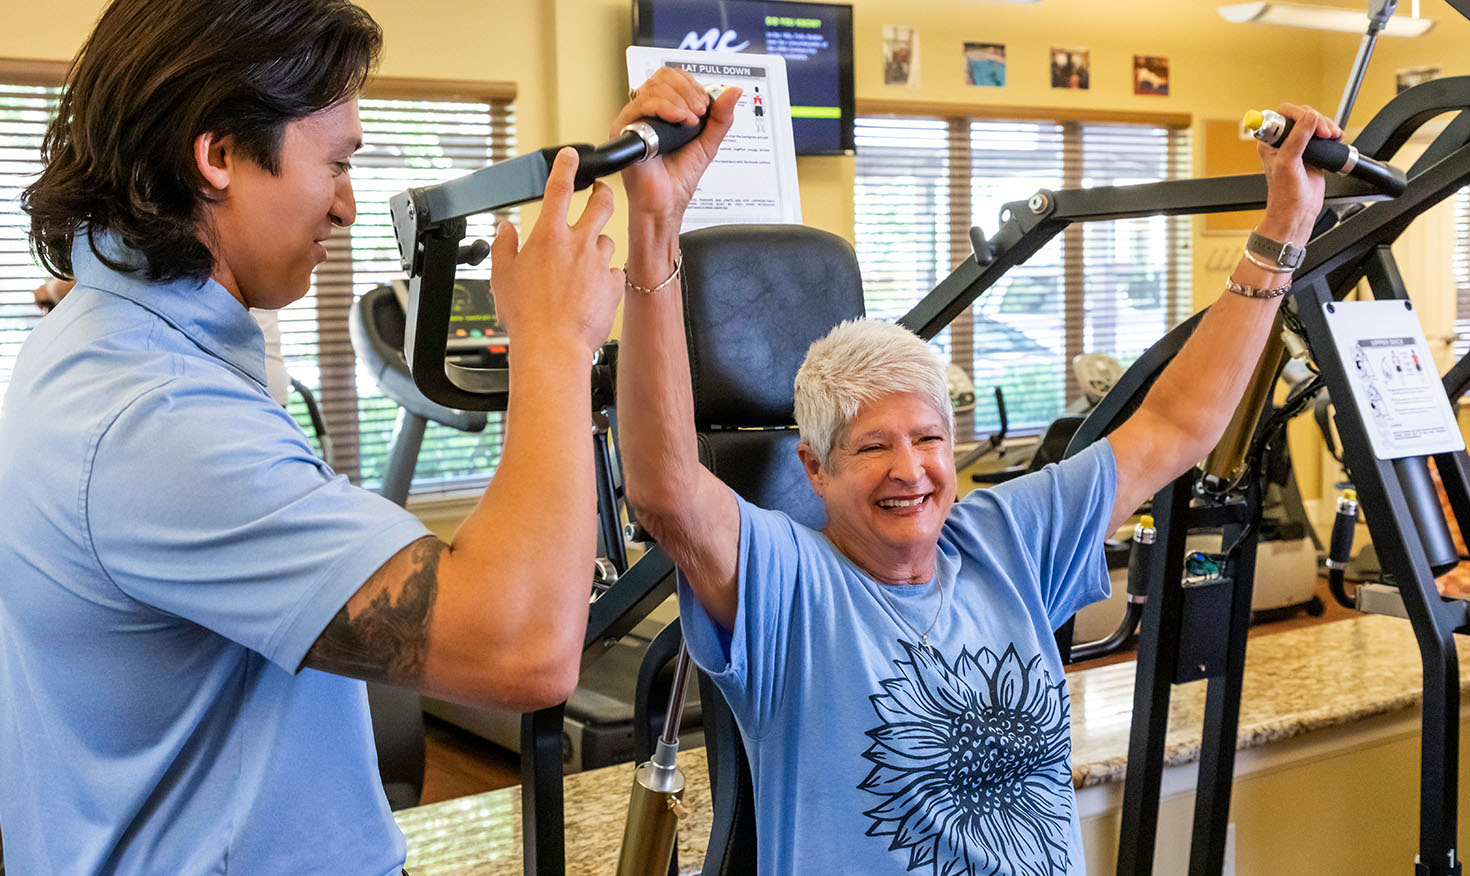  Senior woman using weight machine in fitness center with the assistance of personal trainer